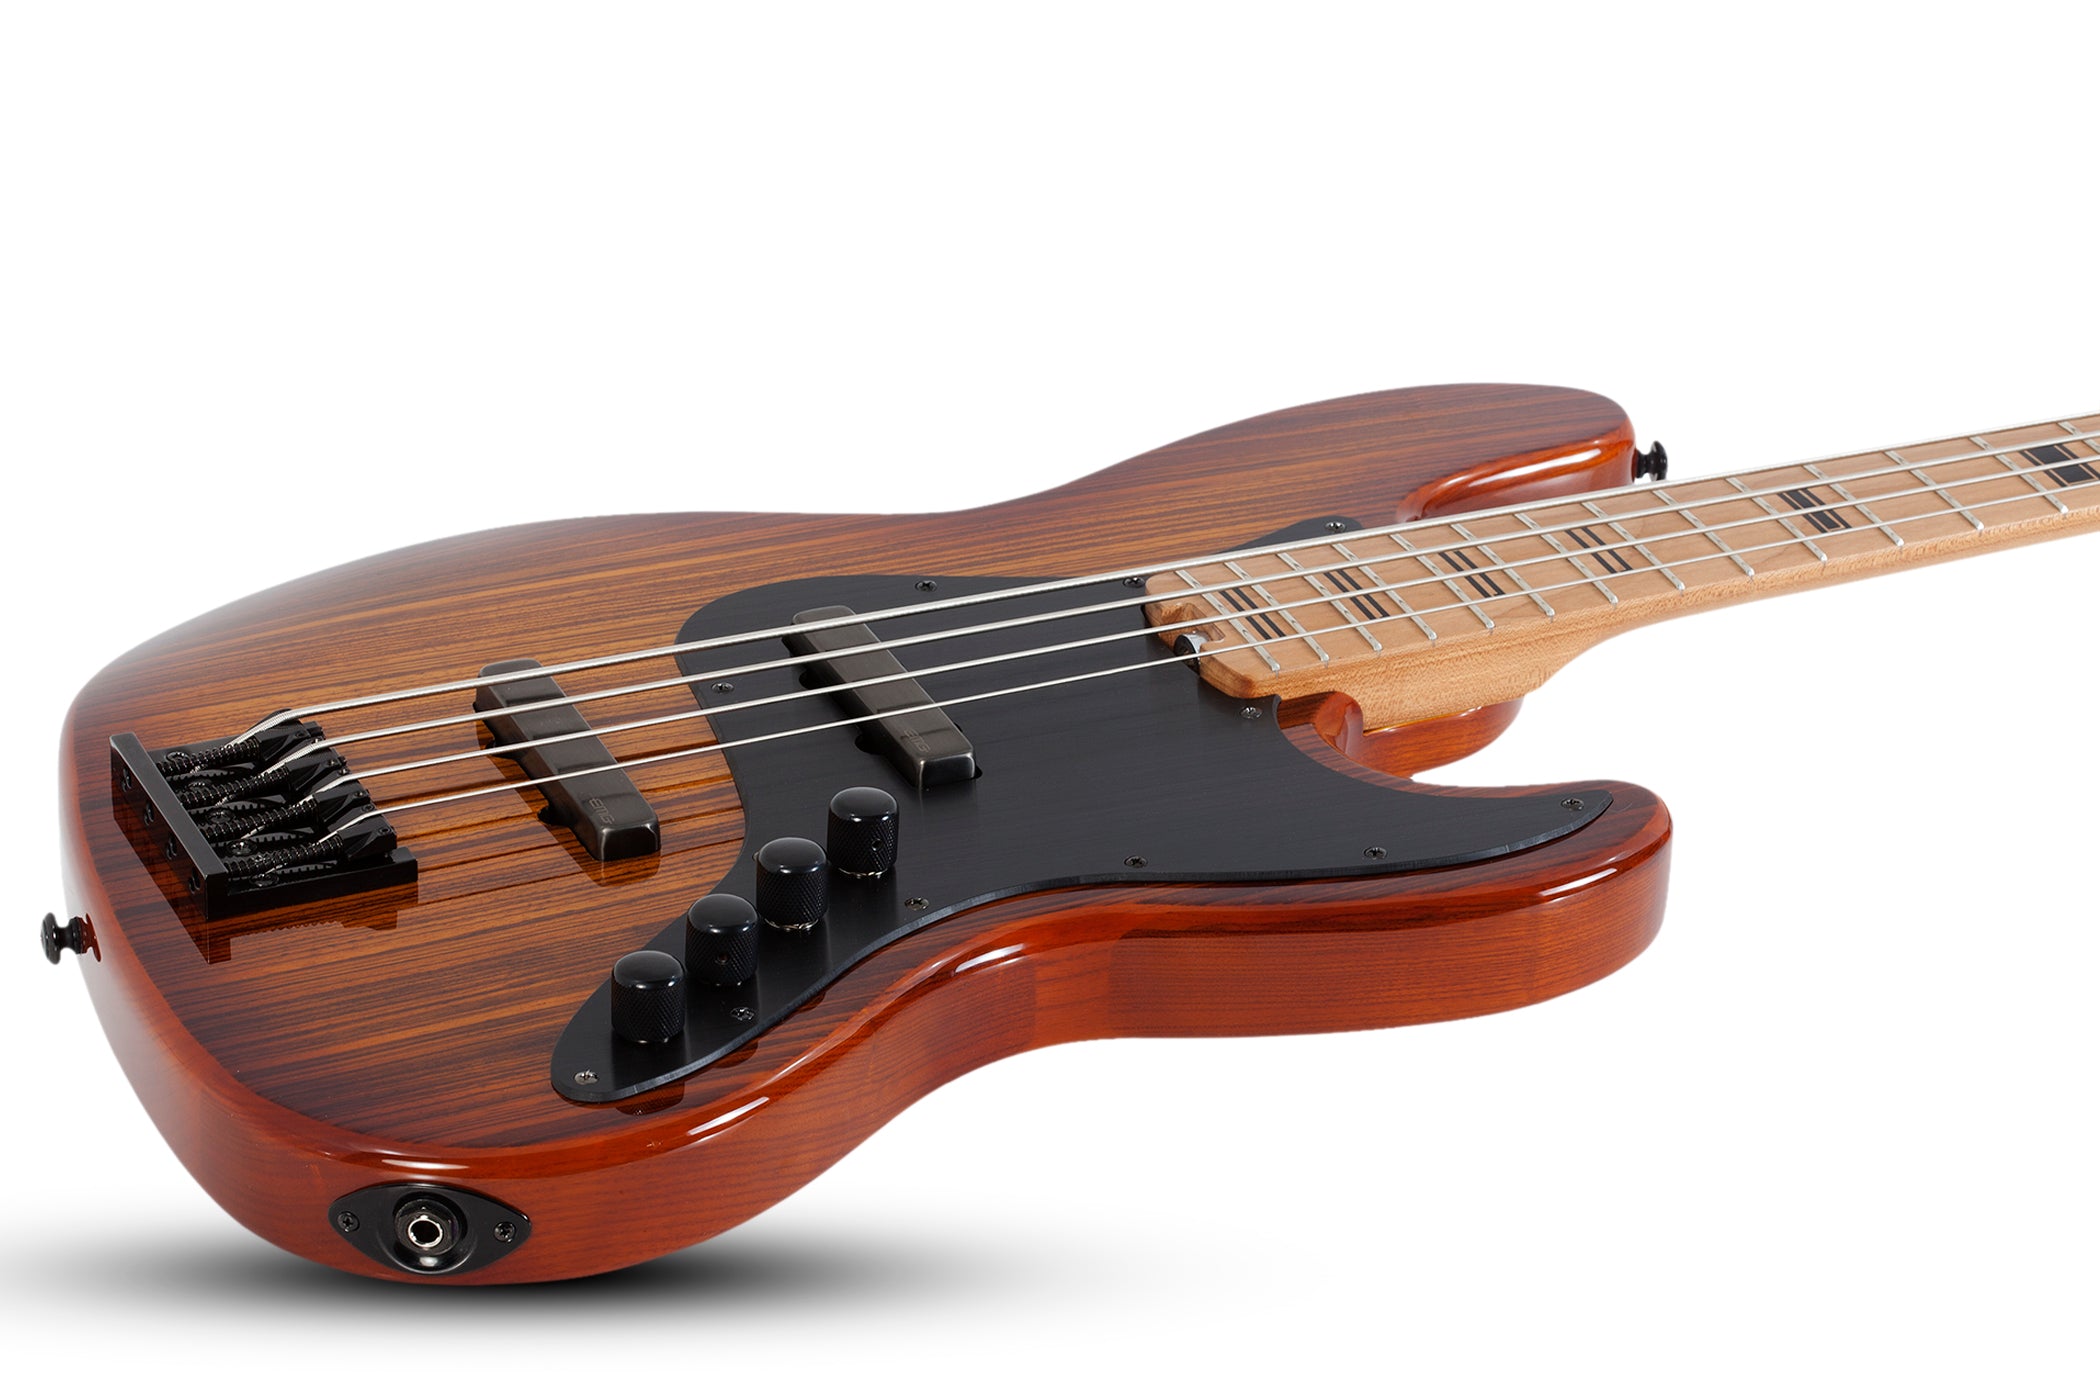 Schecter J-4 Exotic Electric Bass, Faded Vintage Sunburst 2926-SHC SERIAL NUMBER IW21101504 - 9.8 LBS